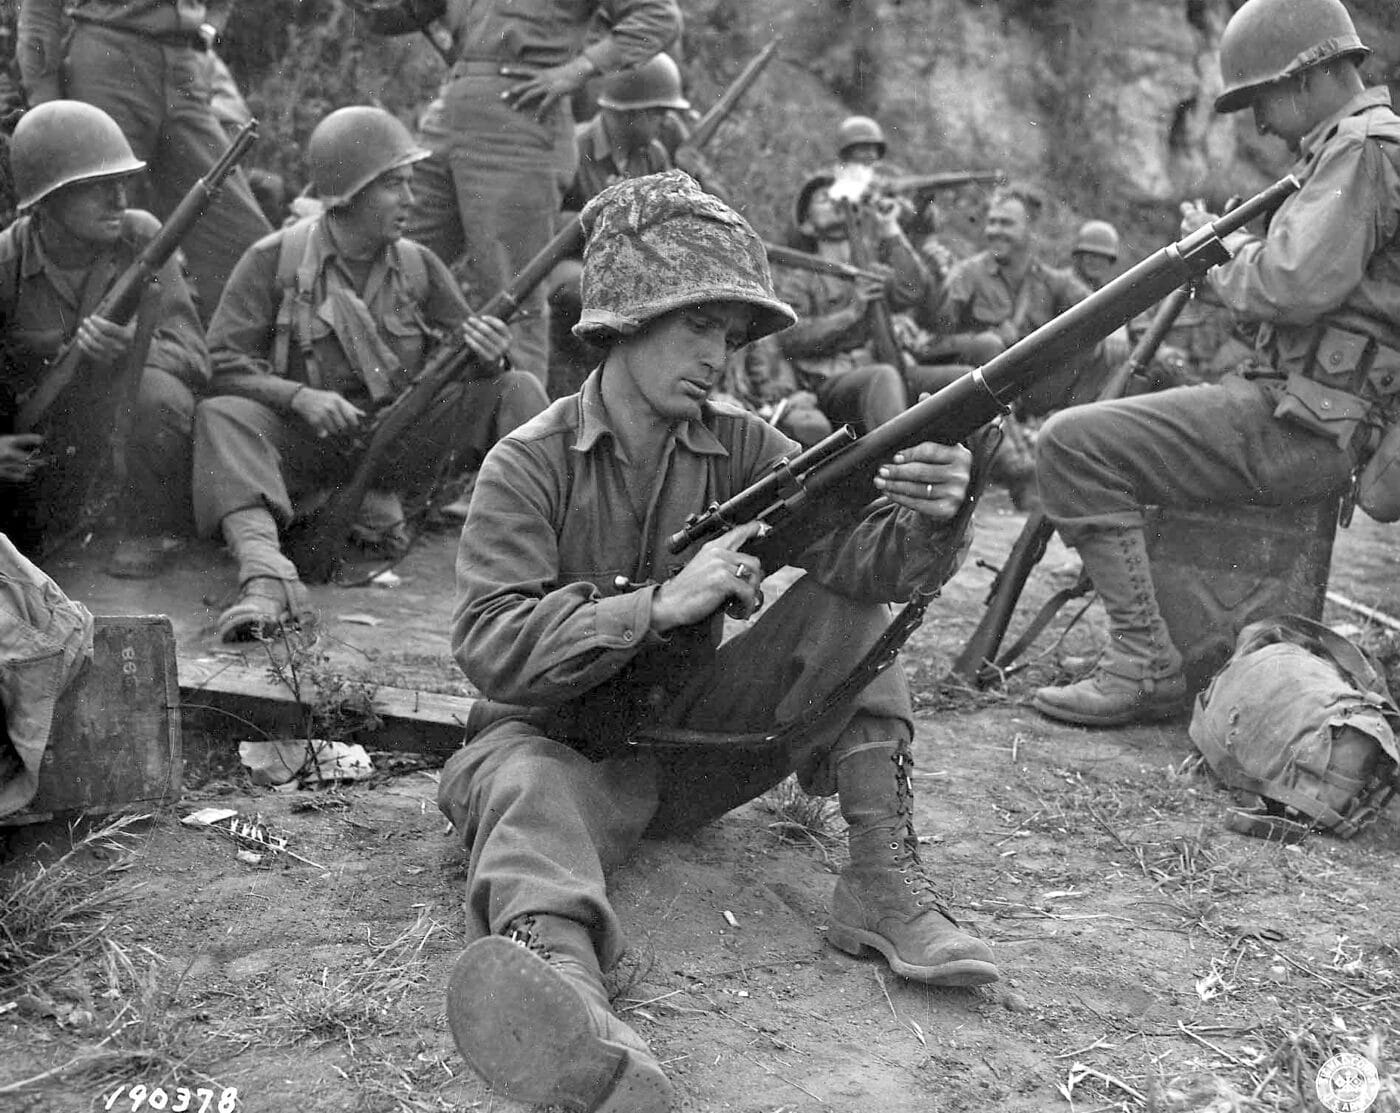 A M1903A4-equipped sniper of the 36th Infantry Division near Valletri, Italy during May 1944